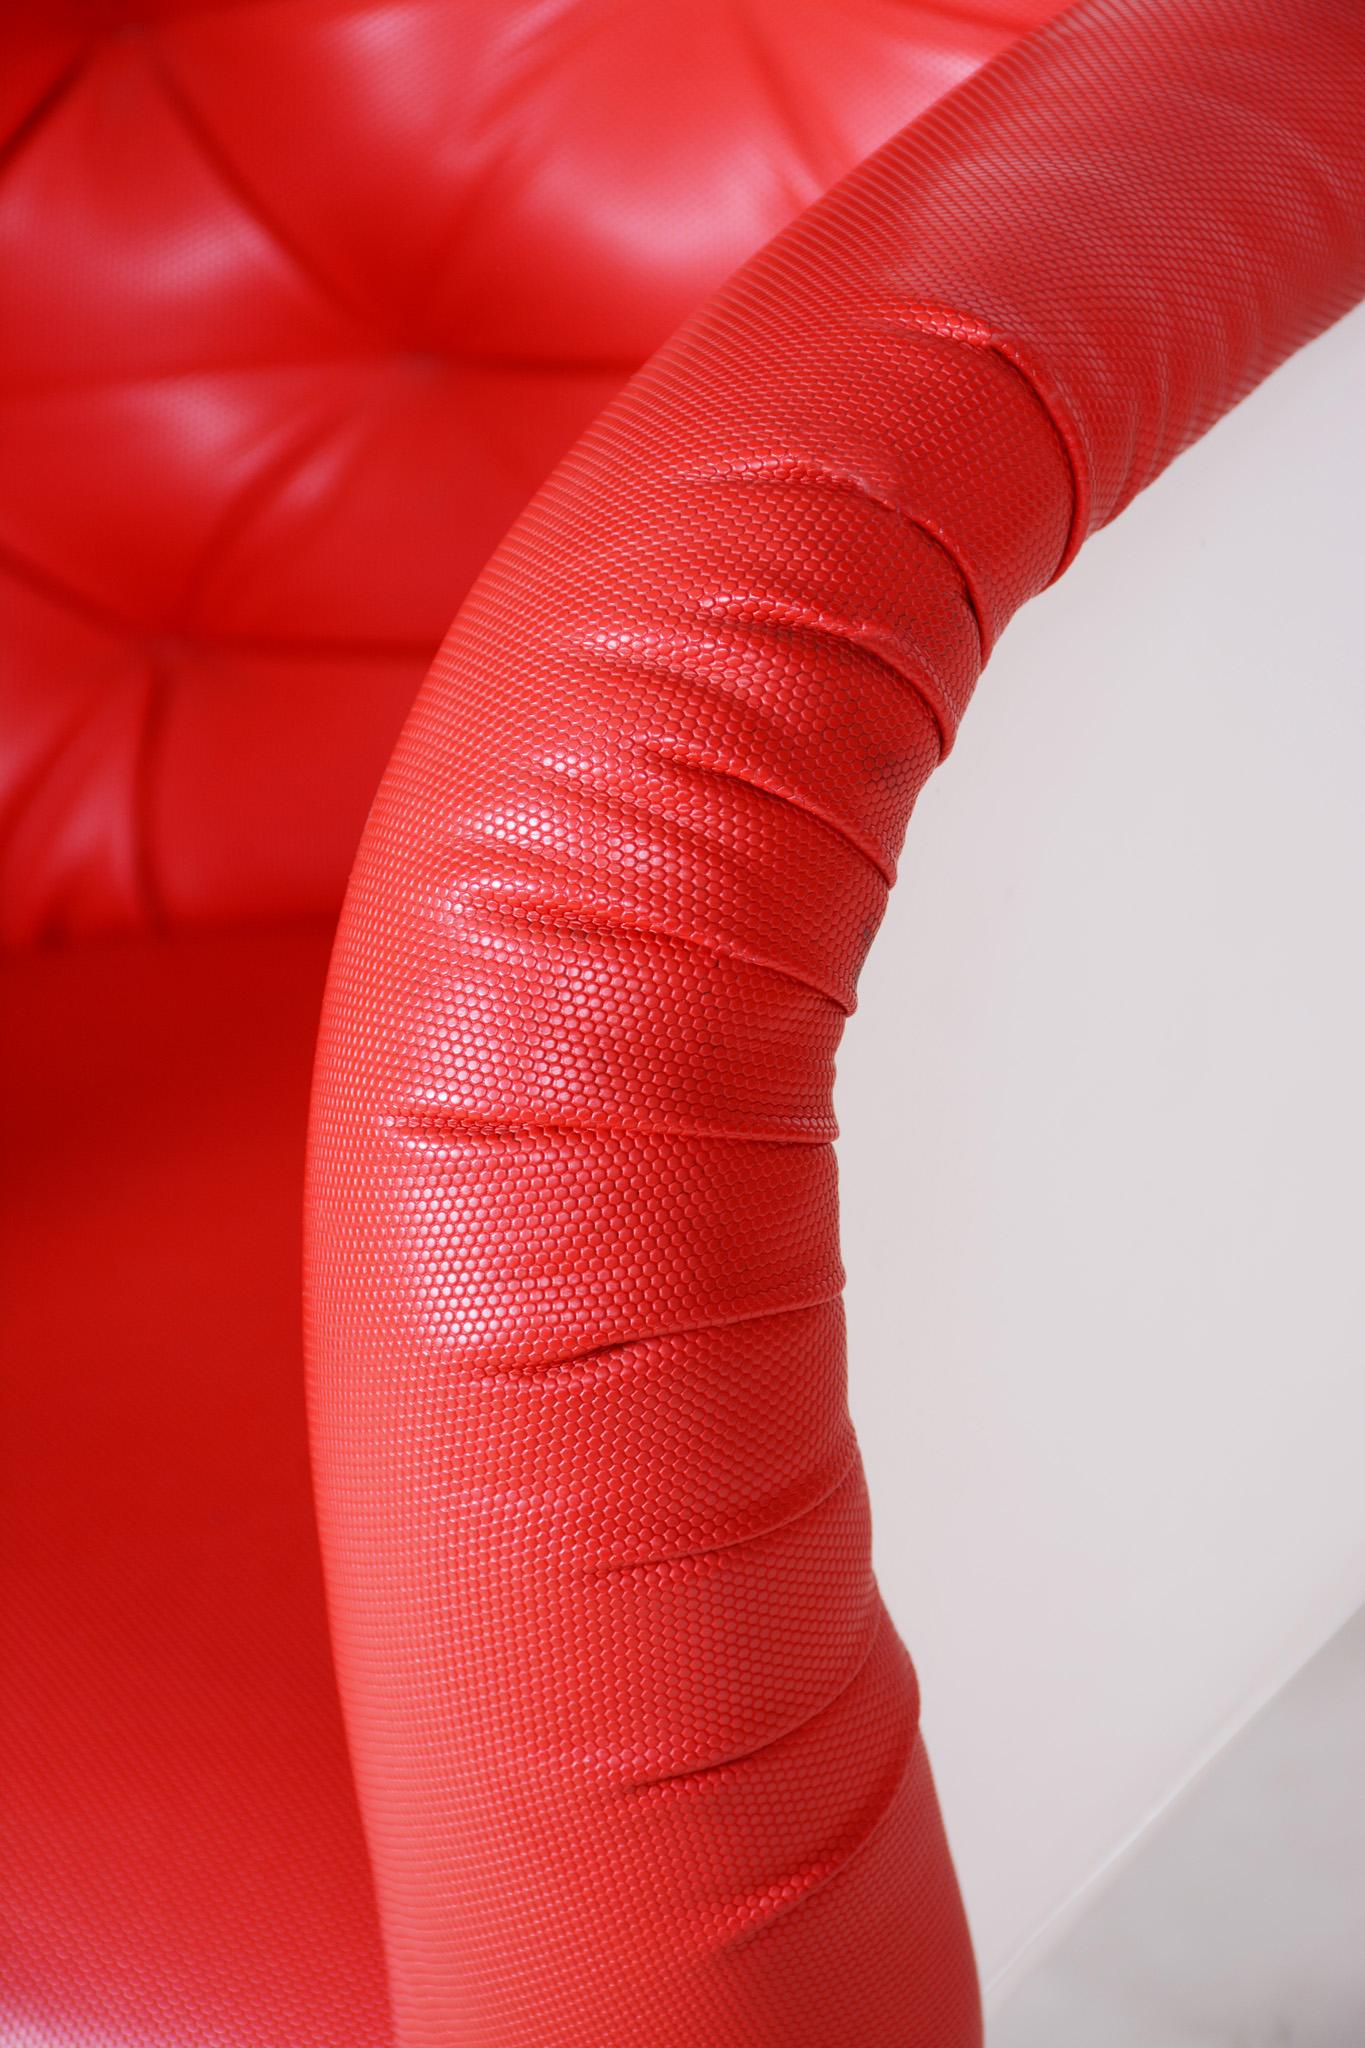 Mid-Century Red and White Armchair, Original Condition, Czechia, 1960s For Sale 5